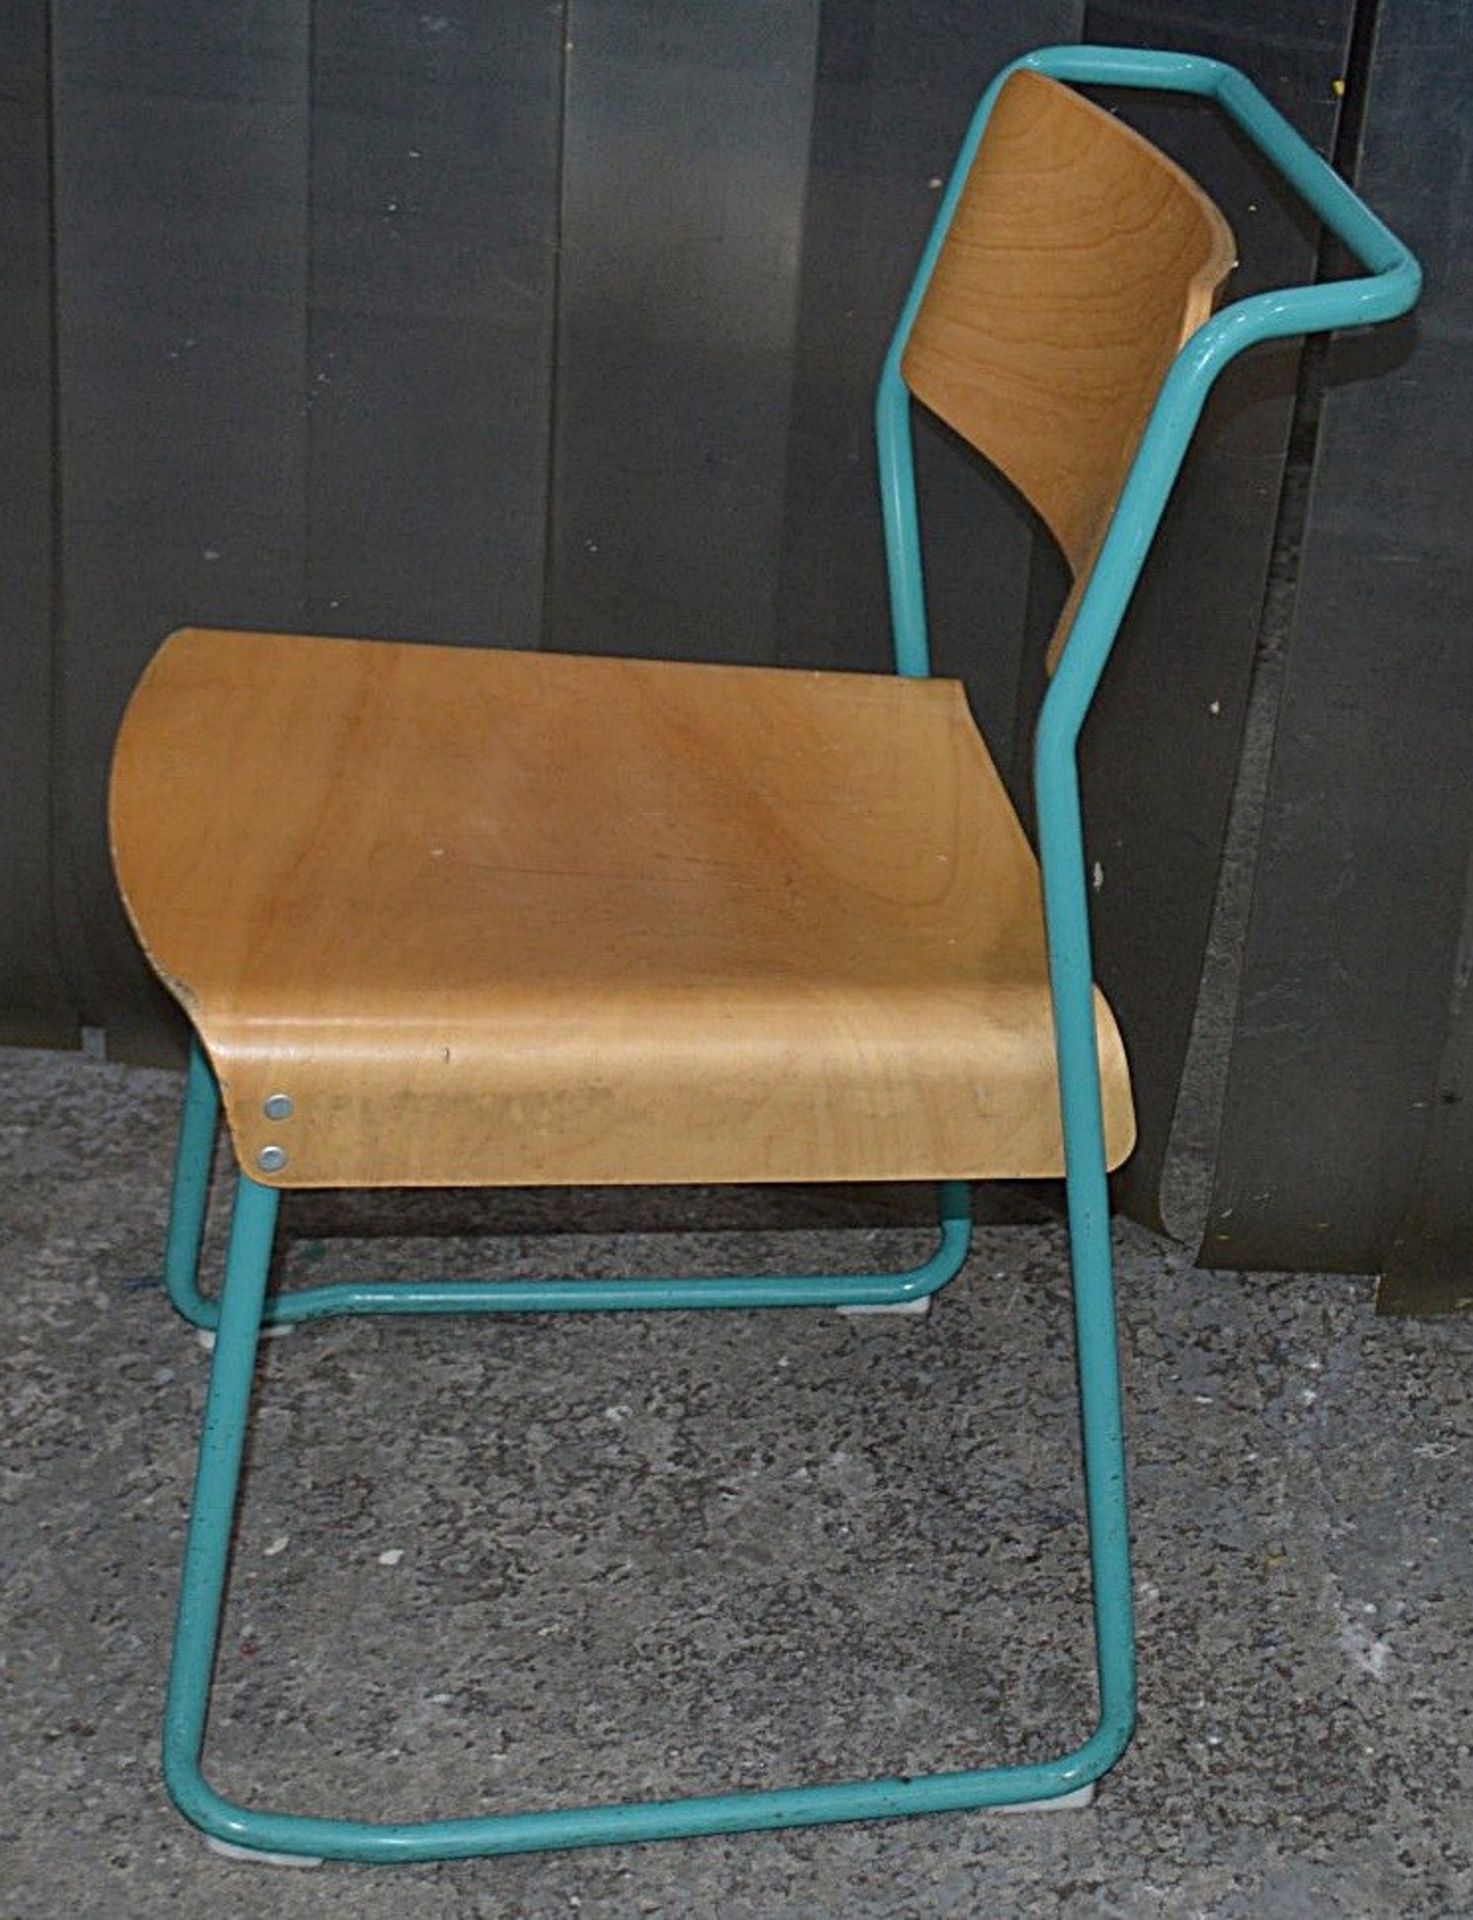 12 x Contemporary Stackable Bistro / Bar Chairs With Metal Frames In Teal With Curved Vanished - Image 8 of 11